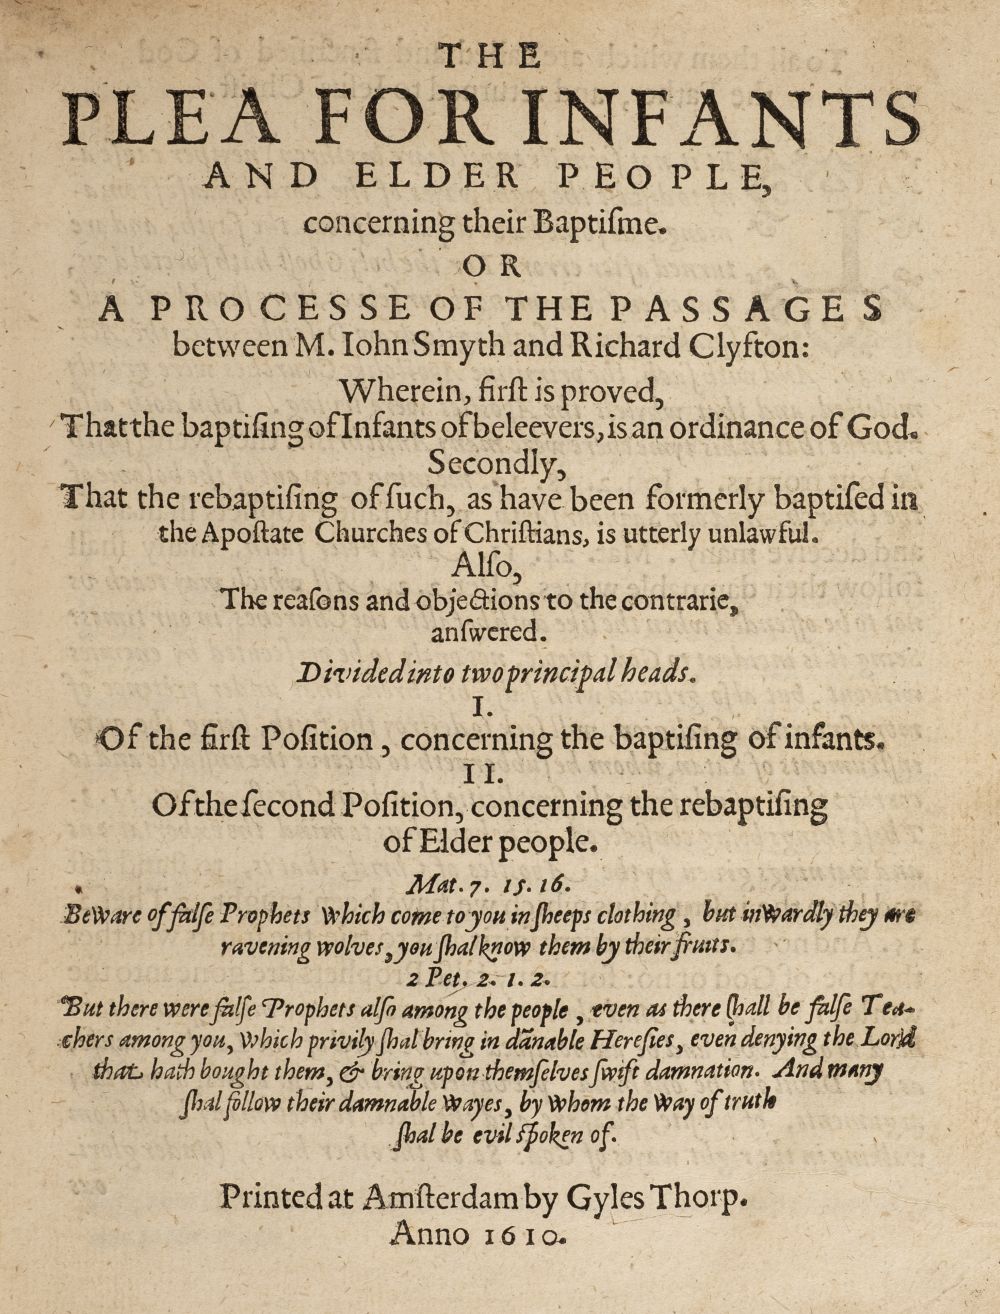 Clifton (Richard). The Plea for Infants and Elder People, 1610 - Image 2 of 14